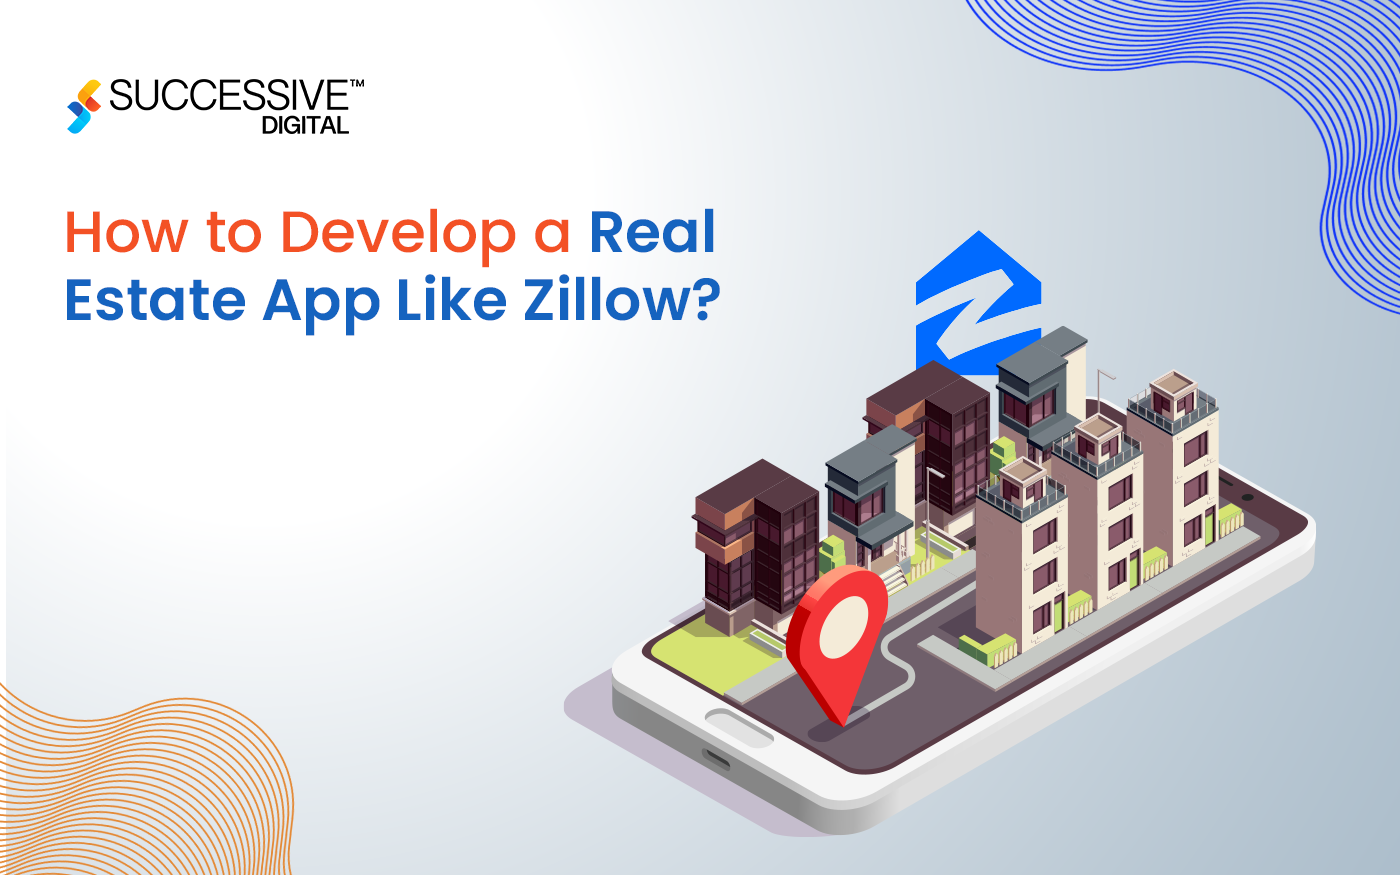 How to Develop a Real Estate App Like Zillow?